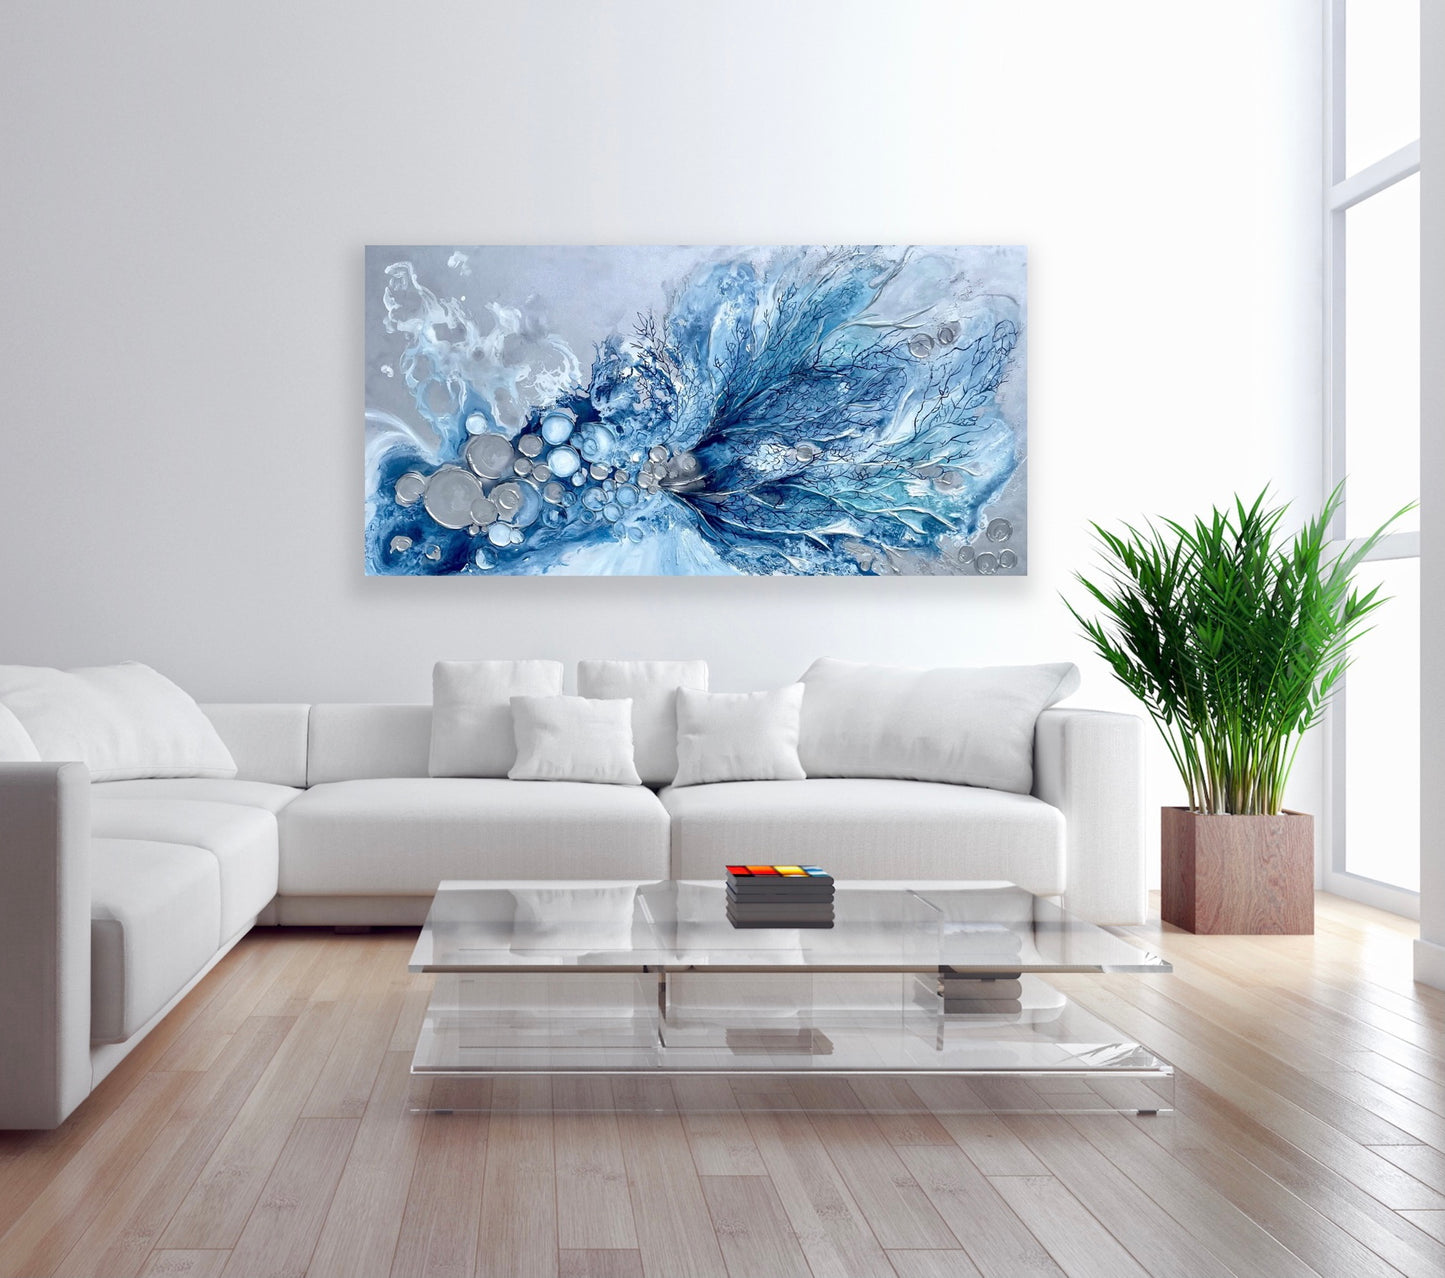 Silver and Blue Barnacles and Corals Painting 36x72 inches